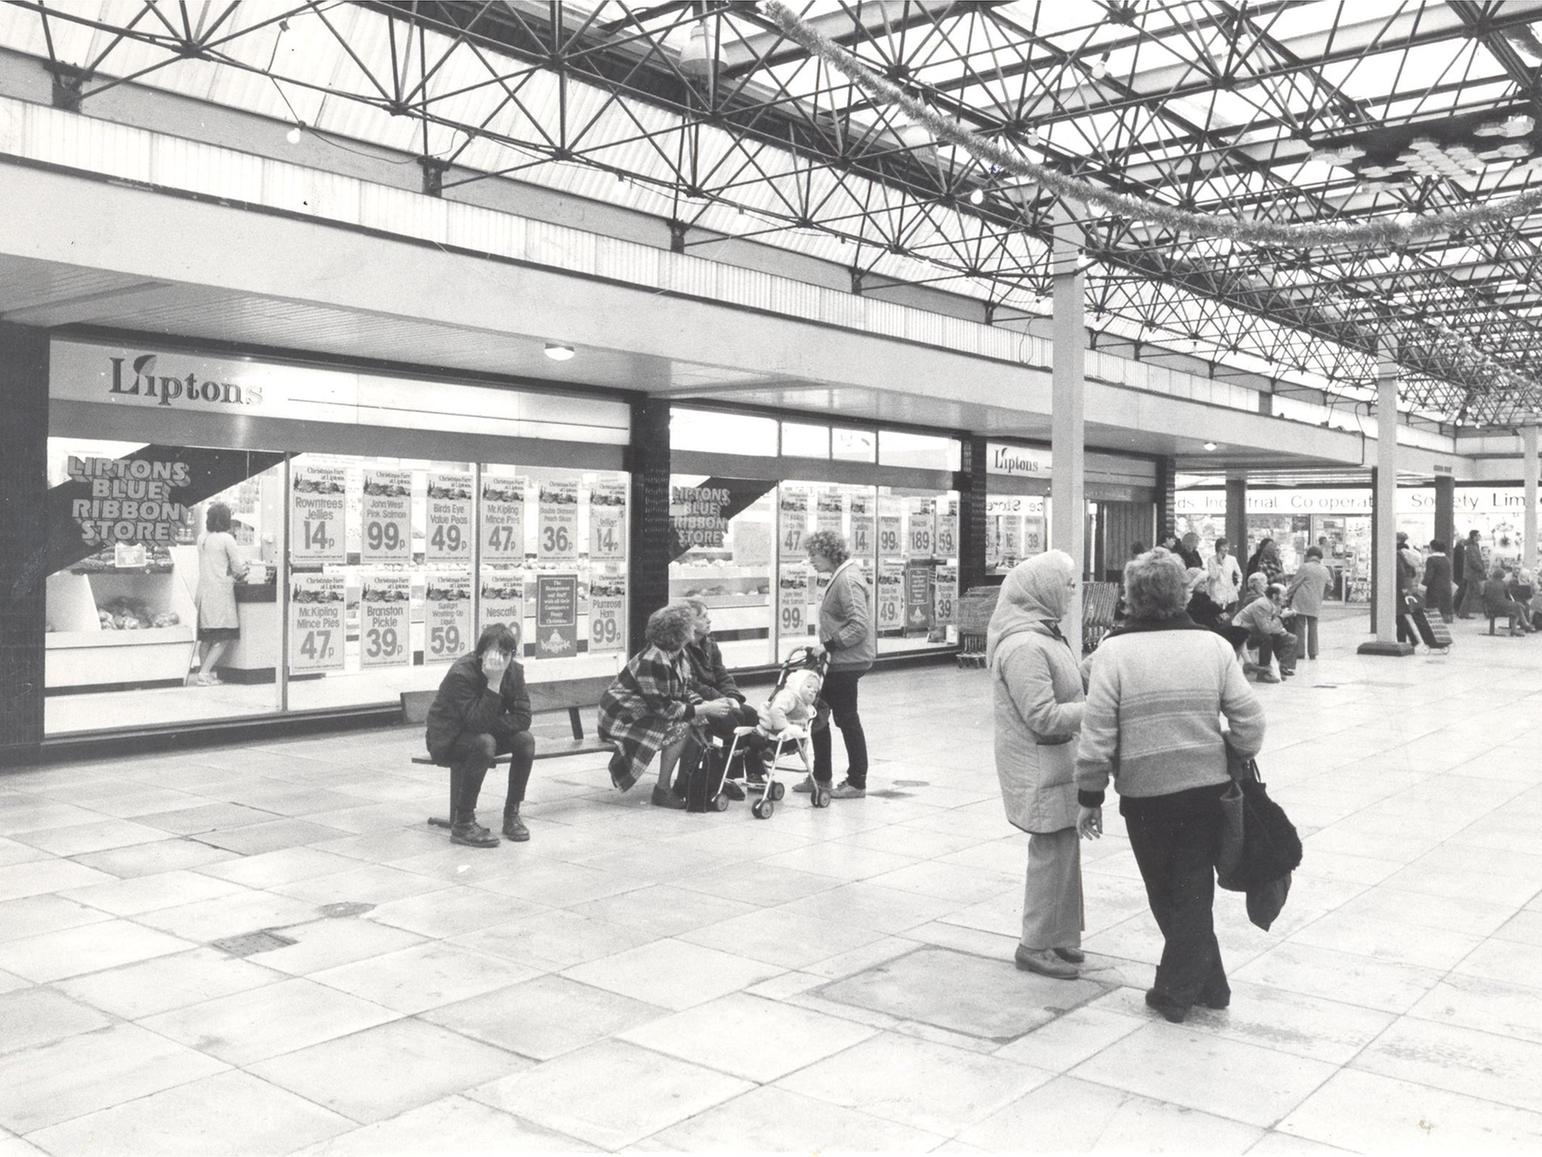 Shoppers at Seacroft Shopping Centre during the early 1980s.